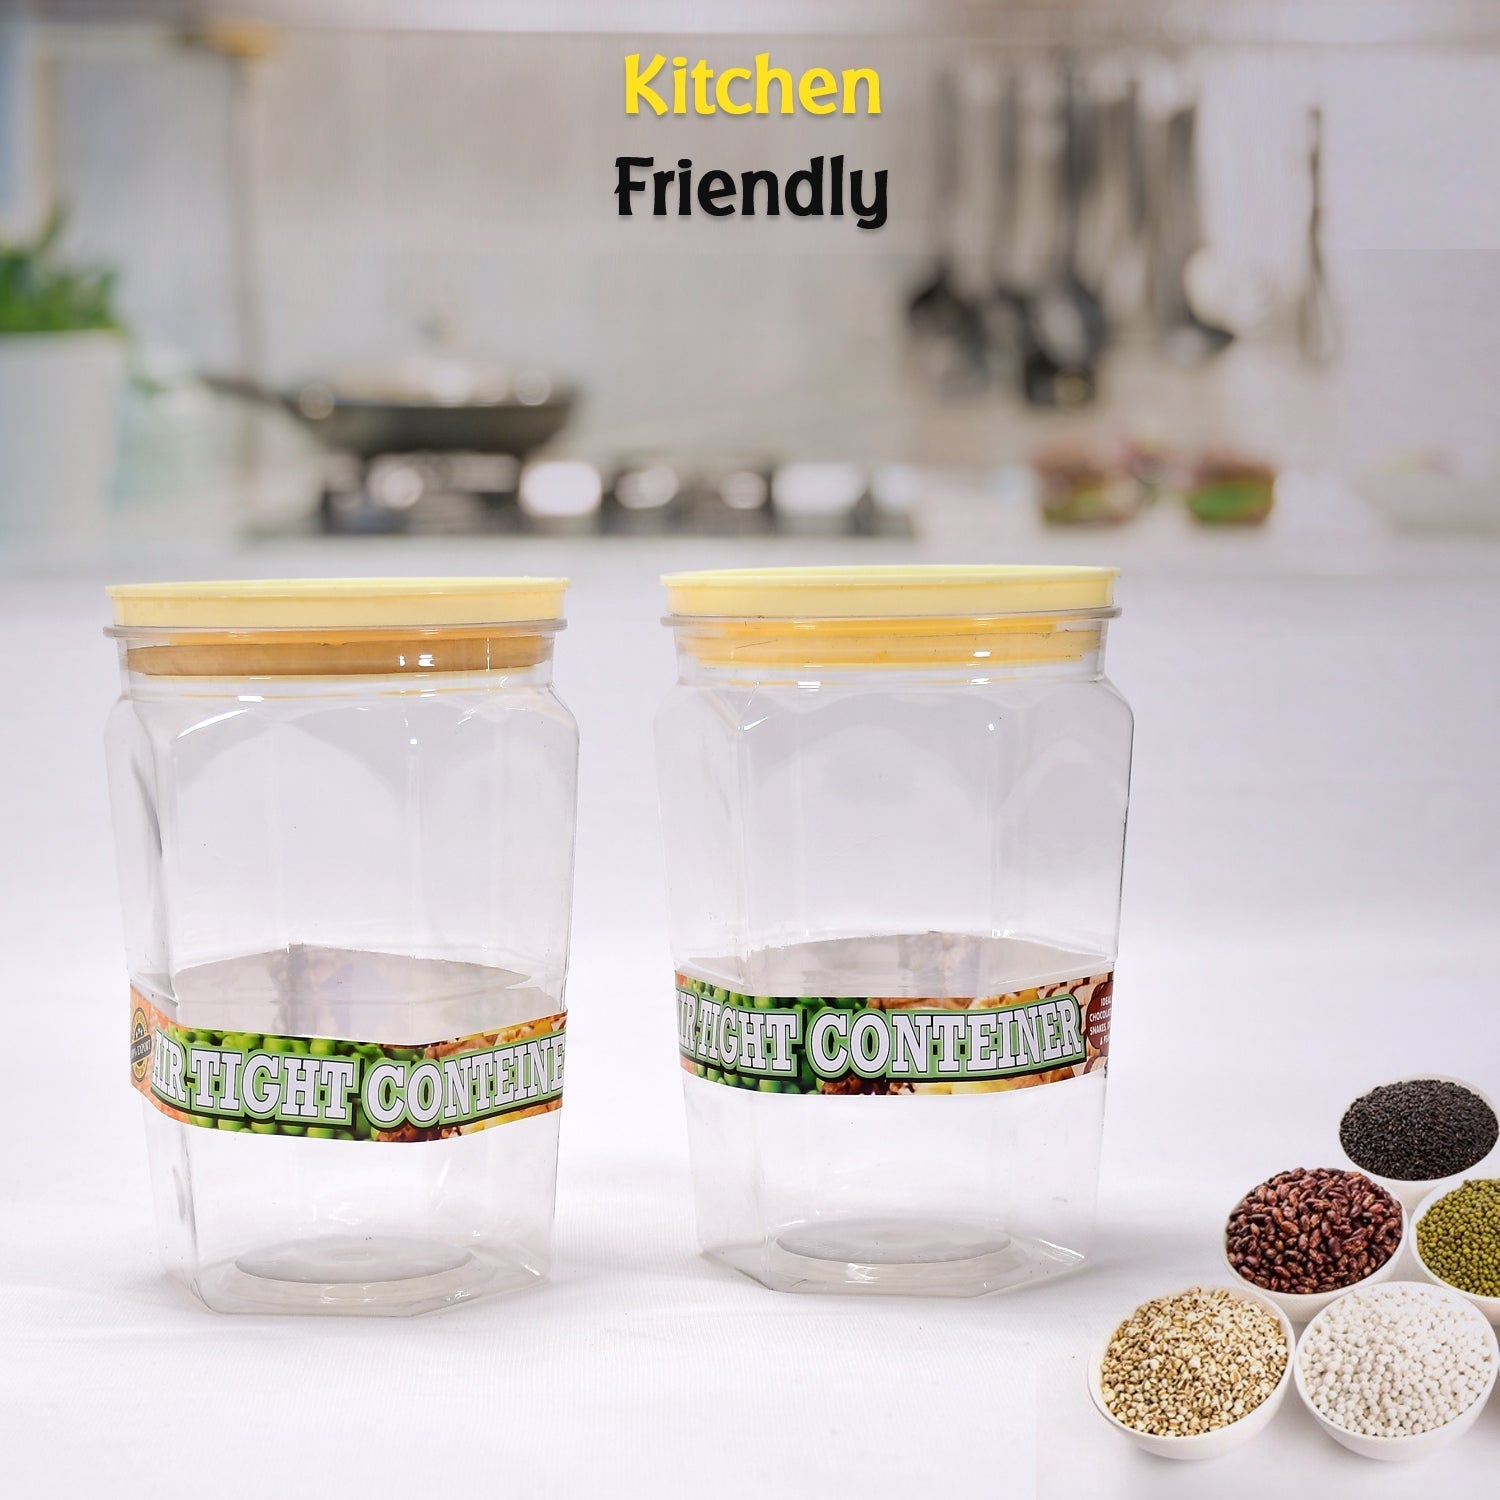 2298 Air Tight Kitchen Storage Container for Rice | Dal | Atta, BPA-Free, Flour | Cereals | Snacks | Stackable | Modular, Round. (Approx - 1100Ml, Set of 2pcs) 